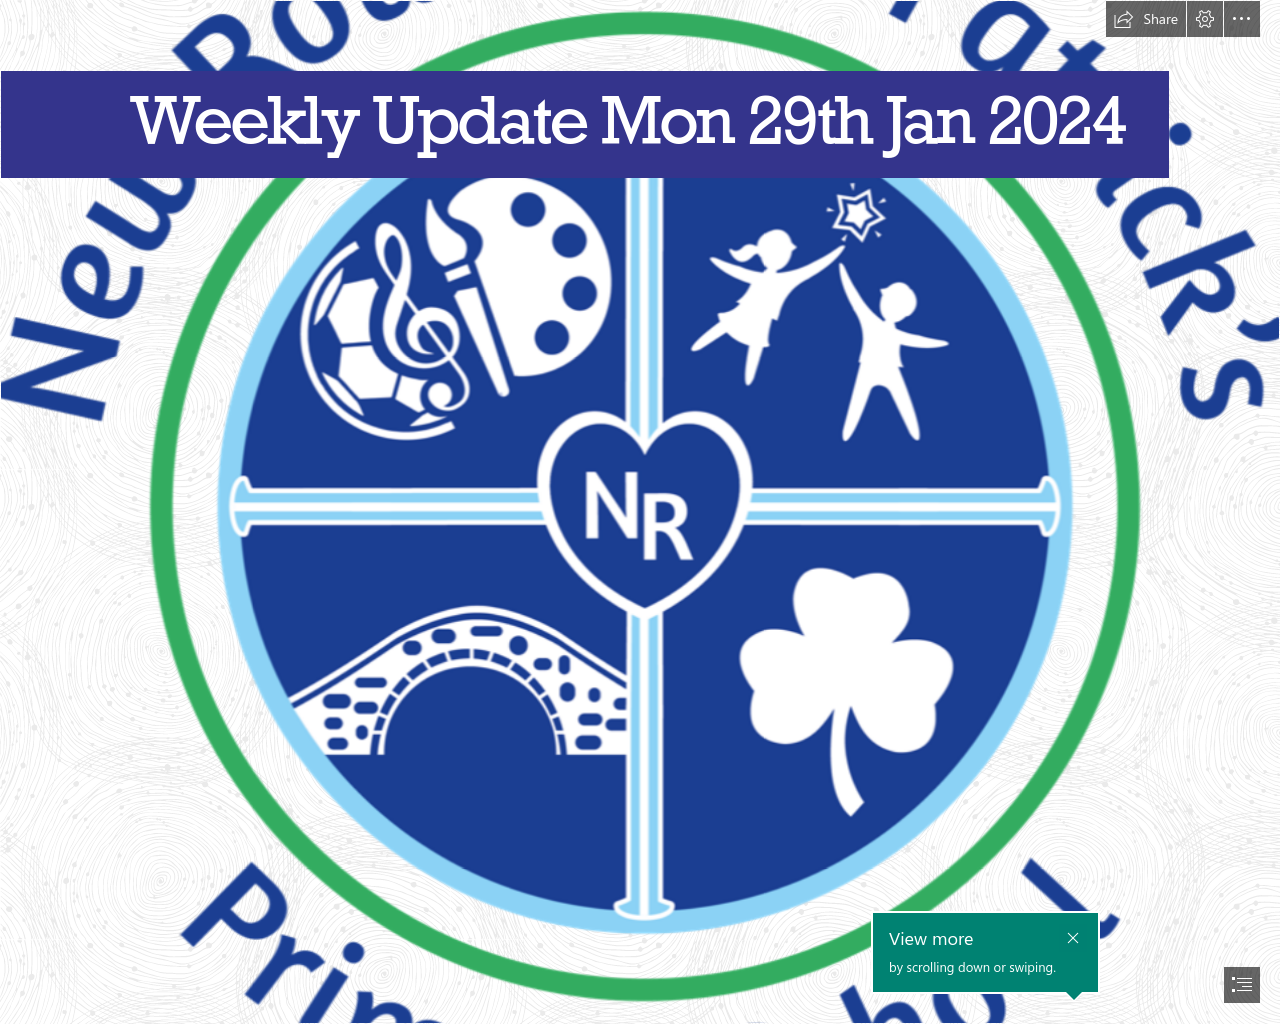 Weekly Update Monday 29th January 2024 